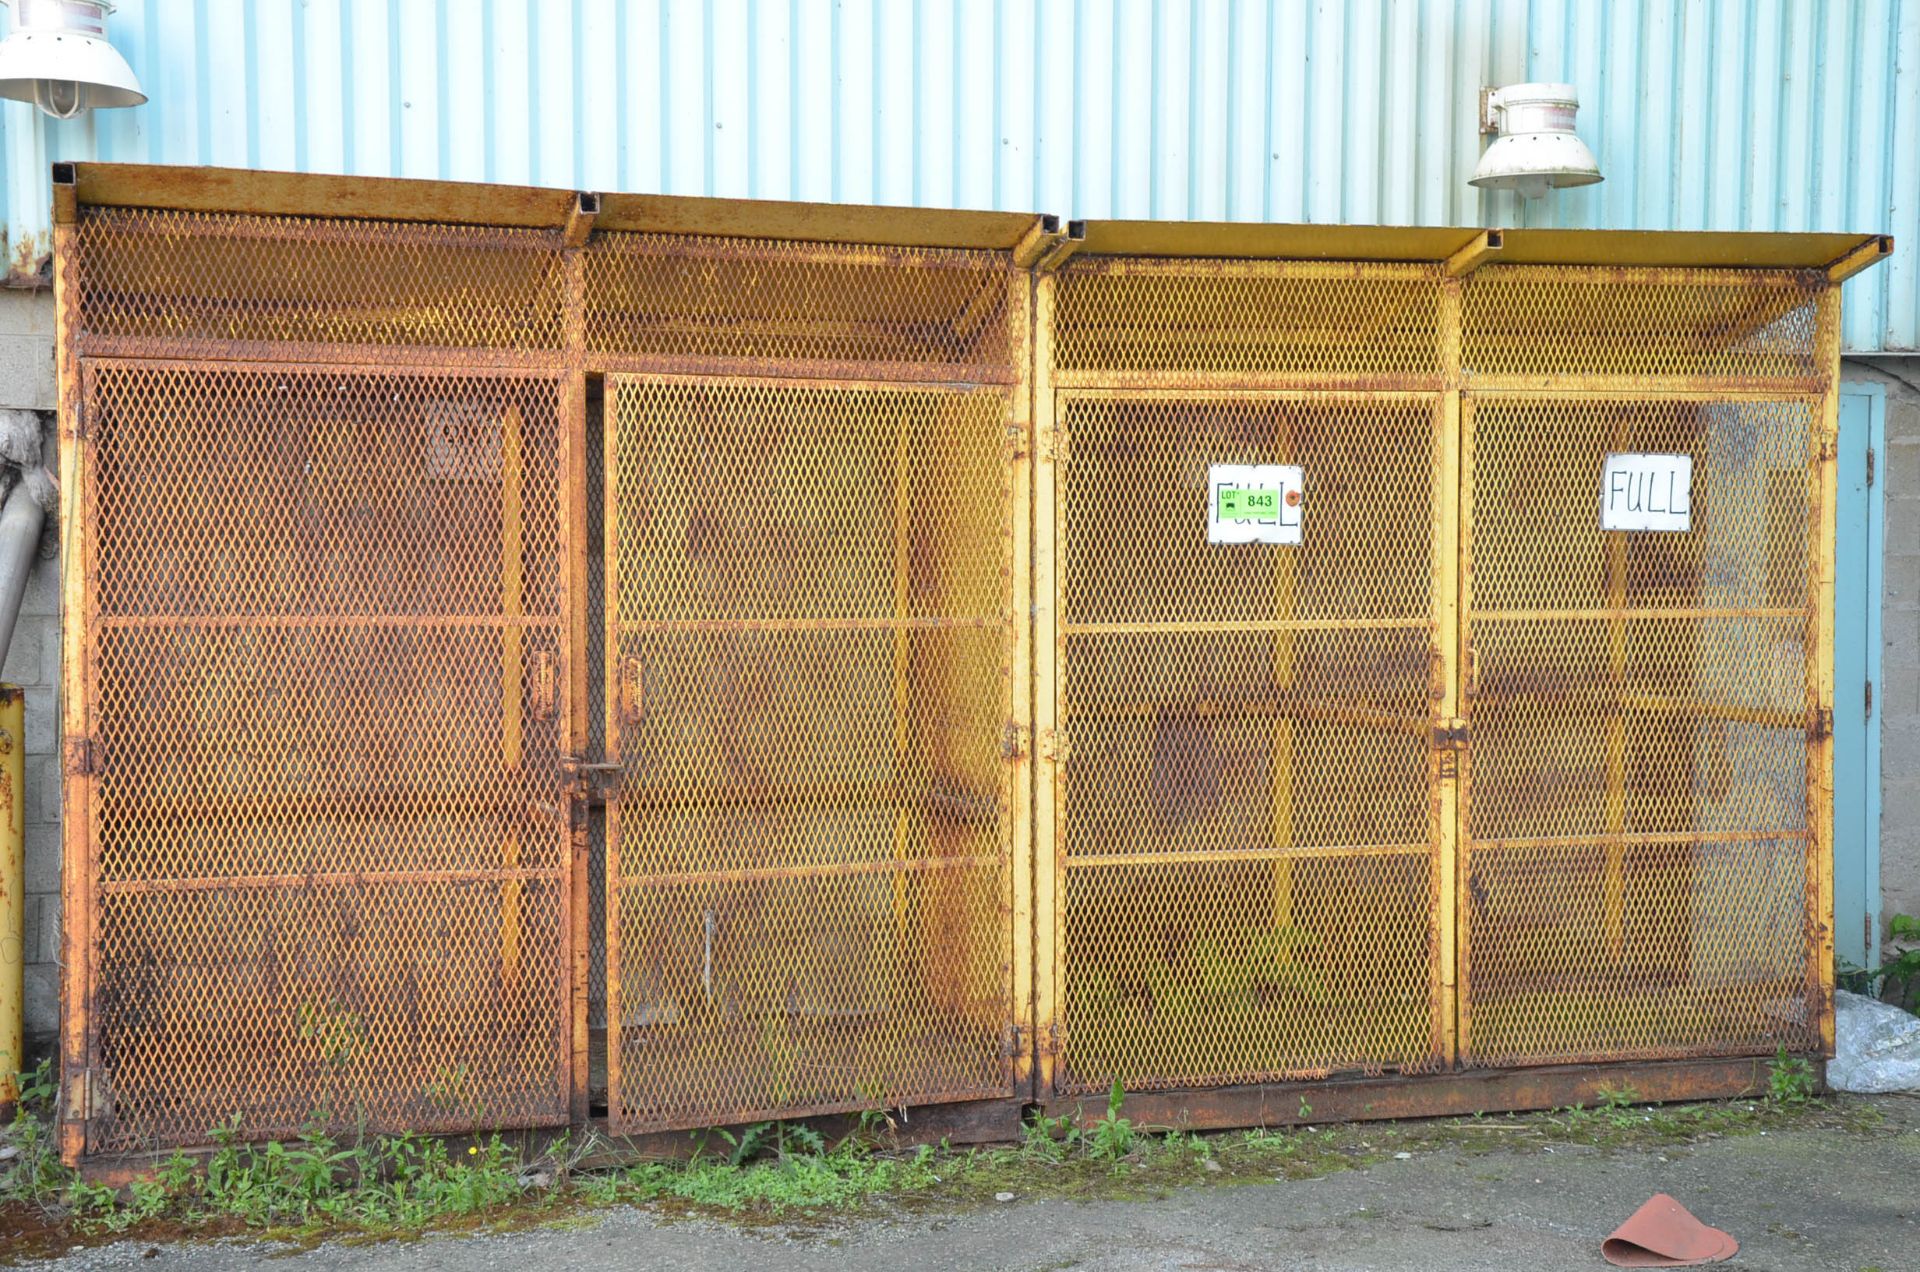 OUTDOOR PROPANE AND FLAMMABLE GAS STORAGE CAGE [RIGGING FEES FOR LOT #843 - $150 USD PLUS APPLICABLE